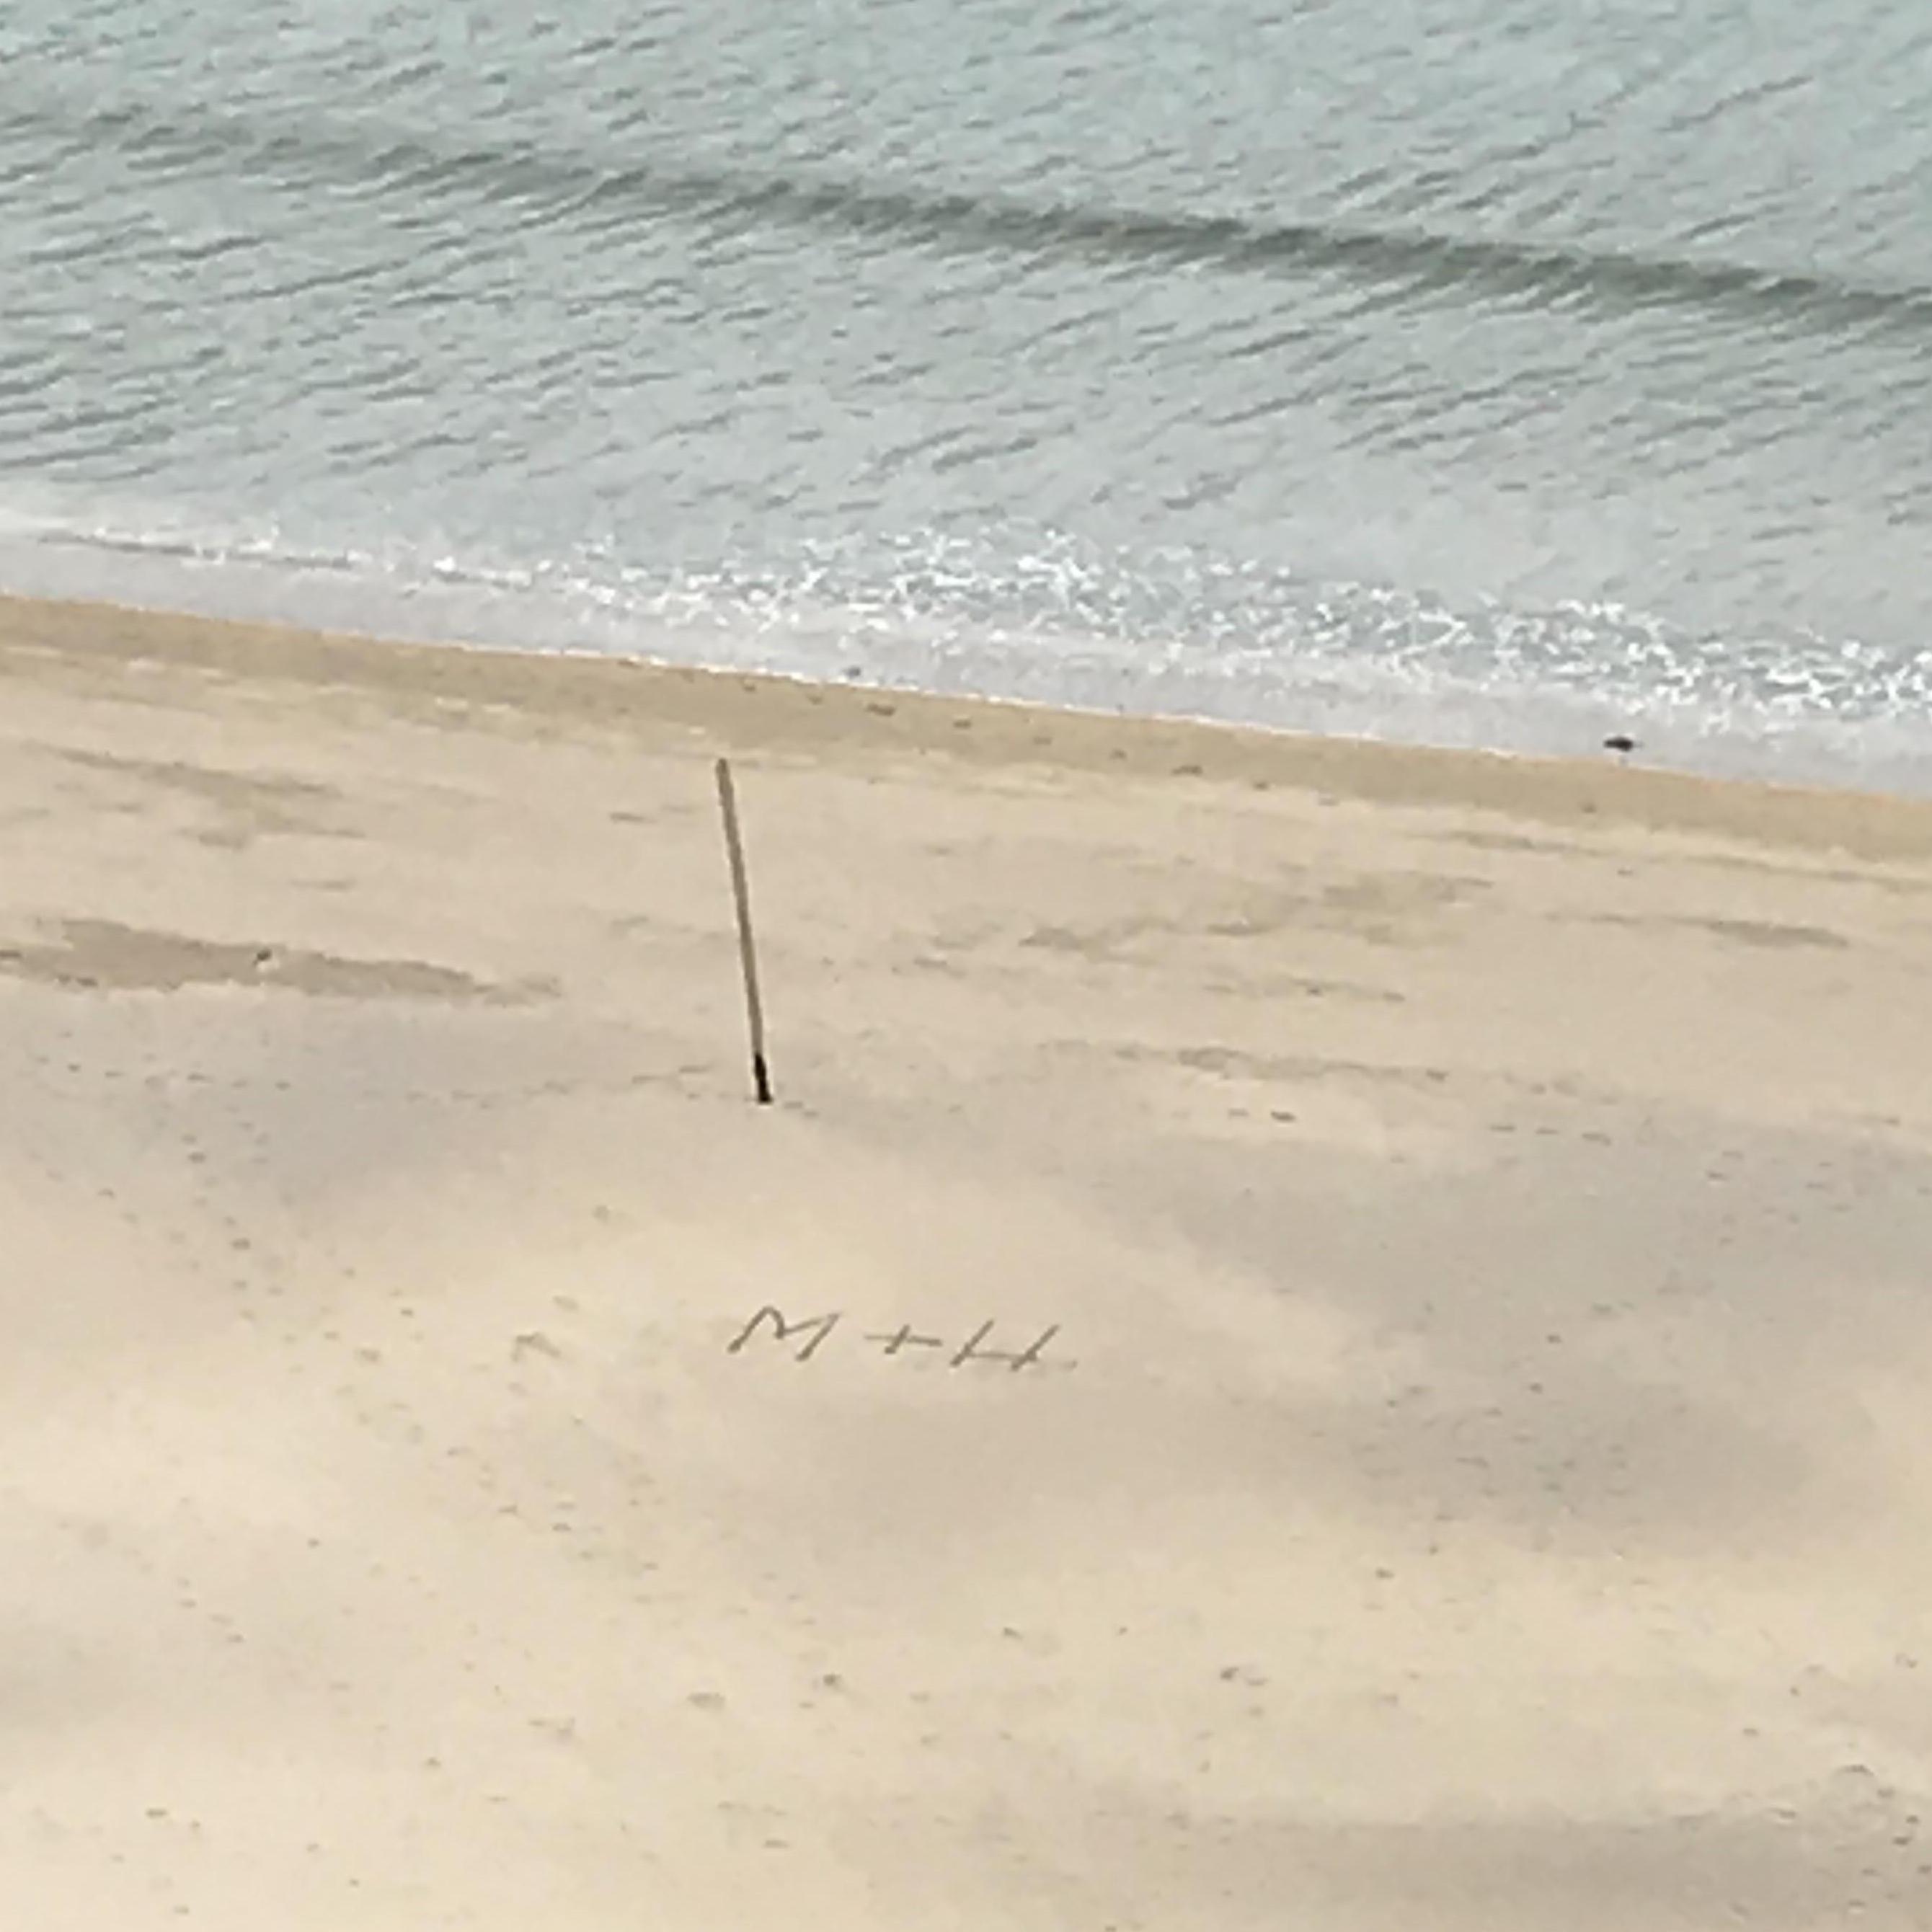 Our initials in the sand on the beaches of Ireland